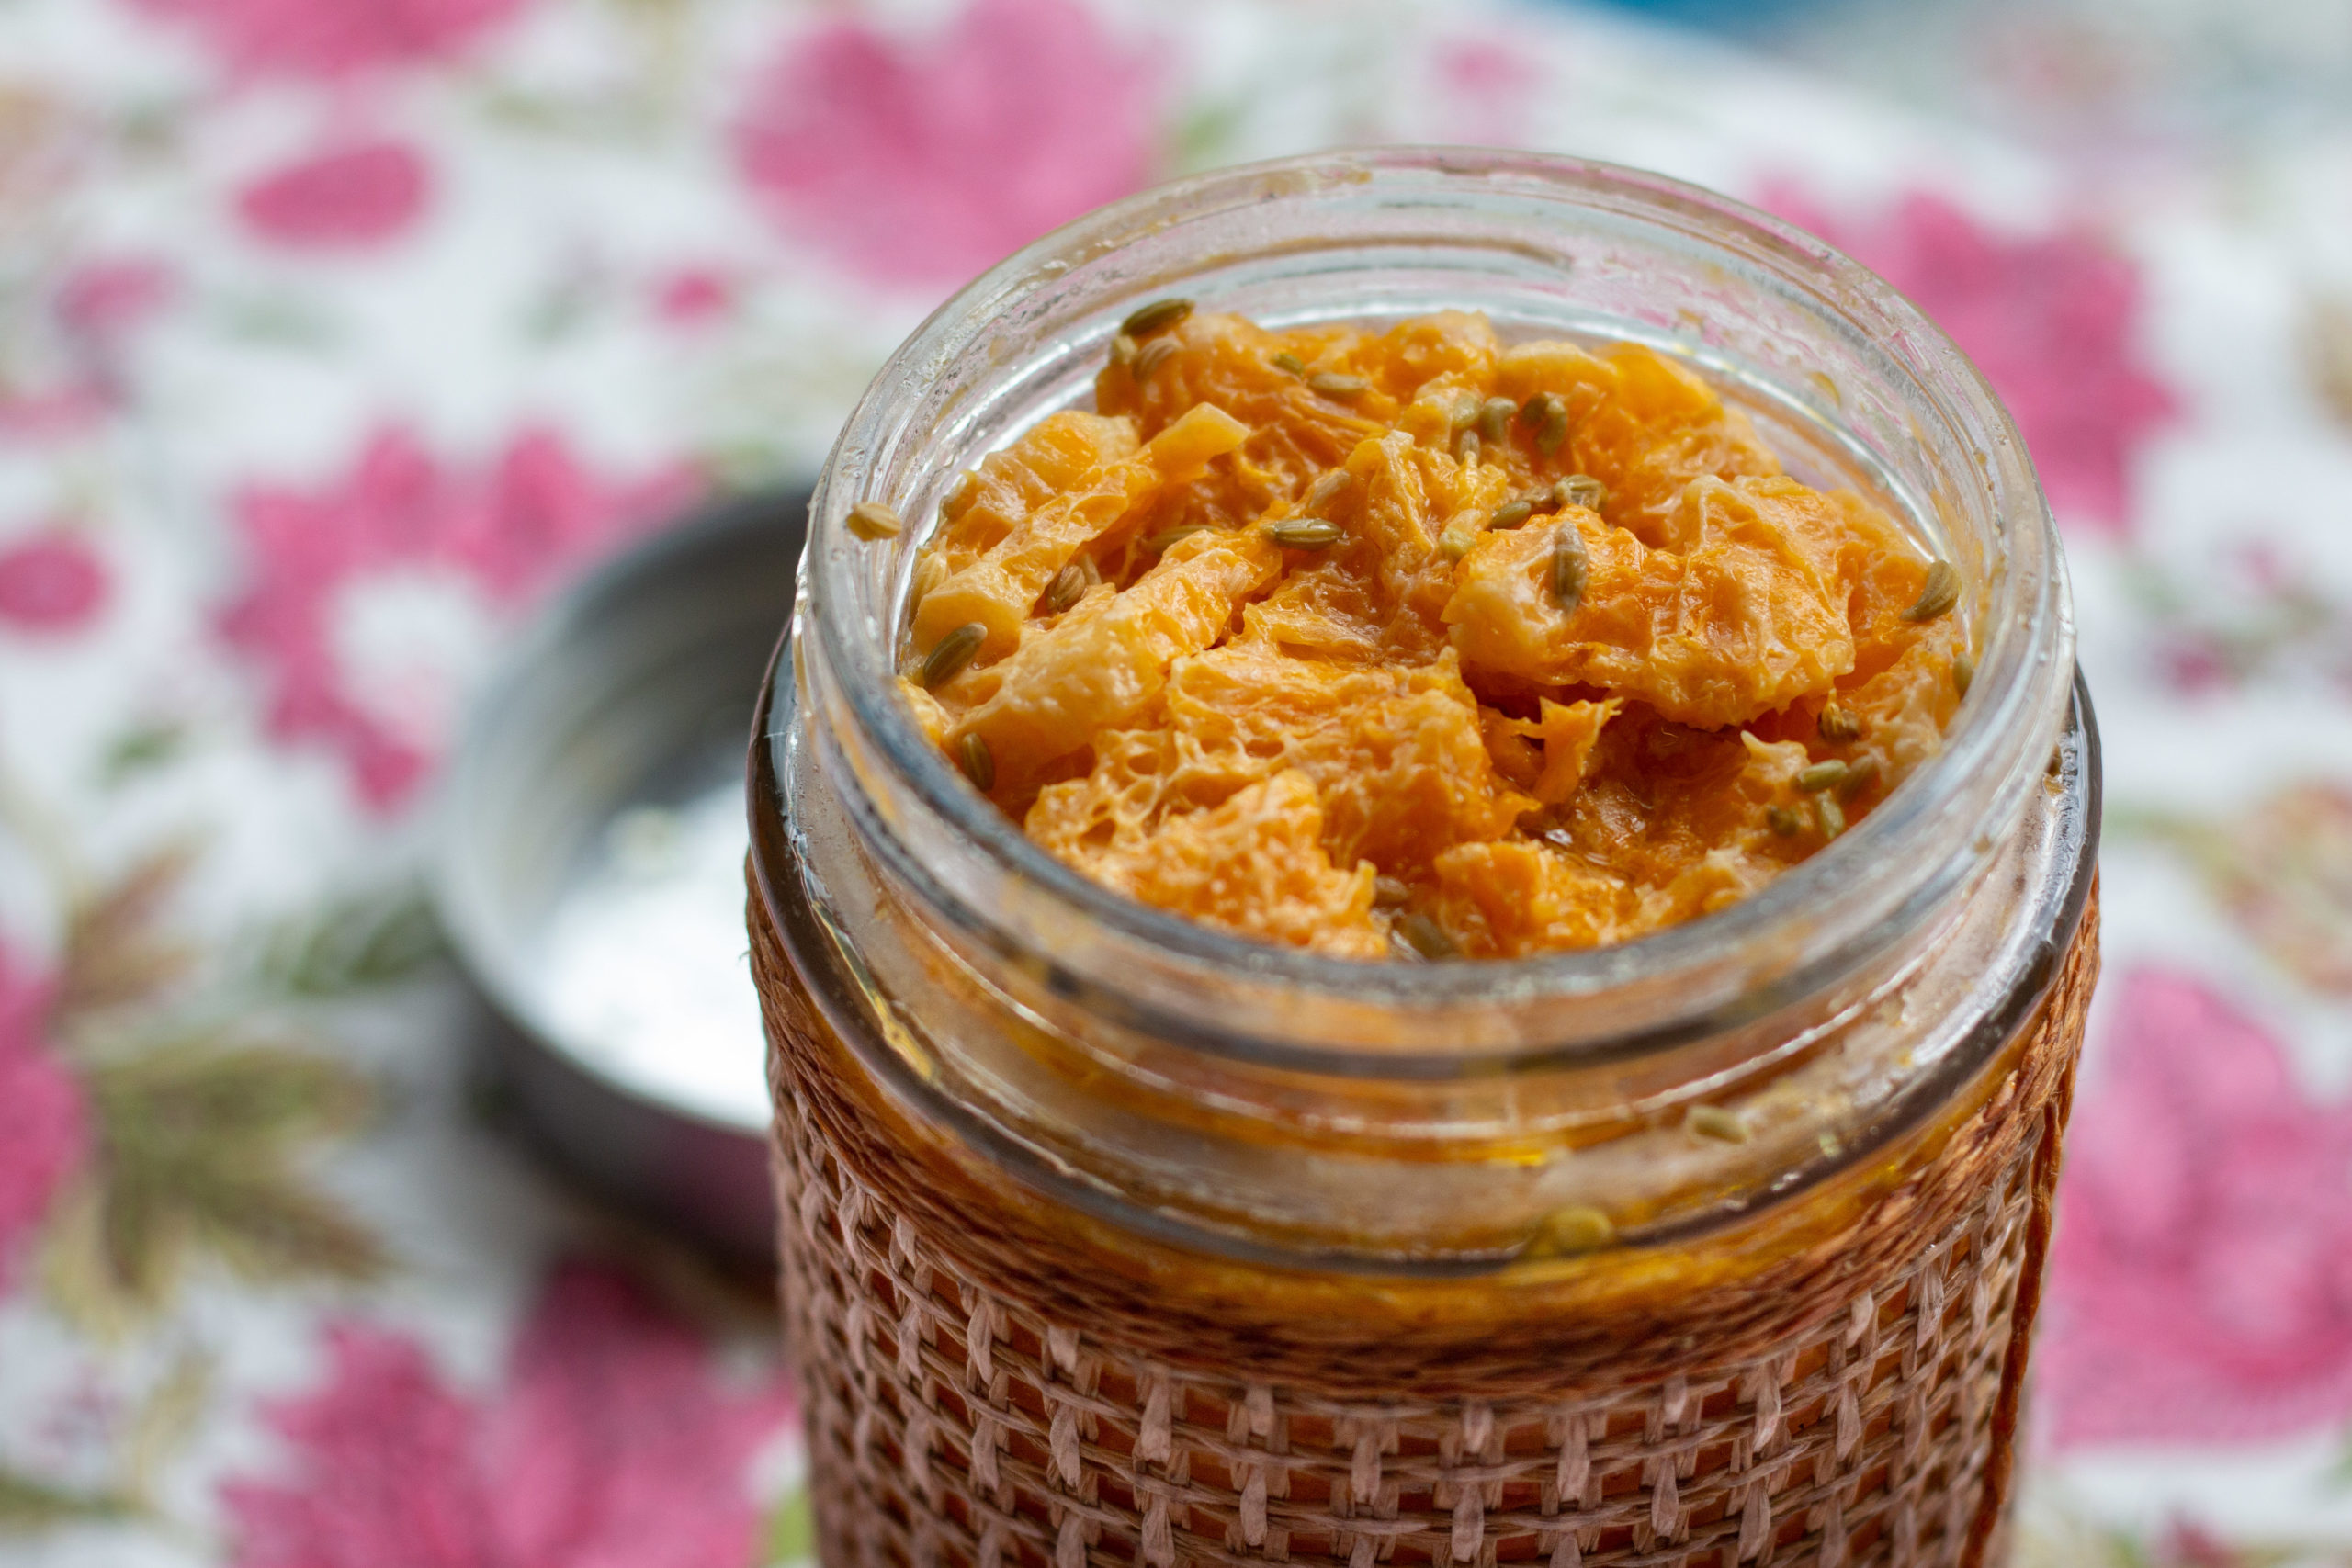 Fermented clementines in a glass jar